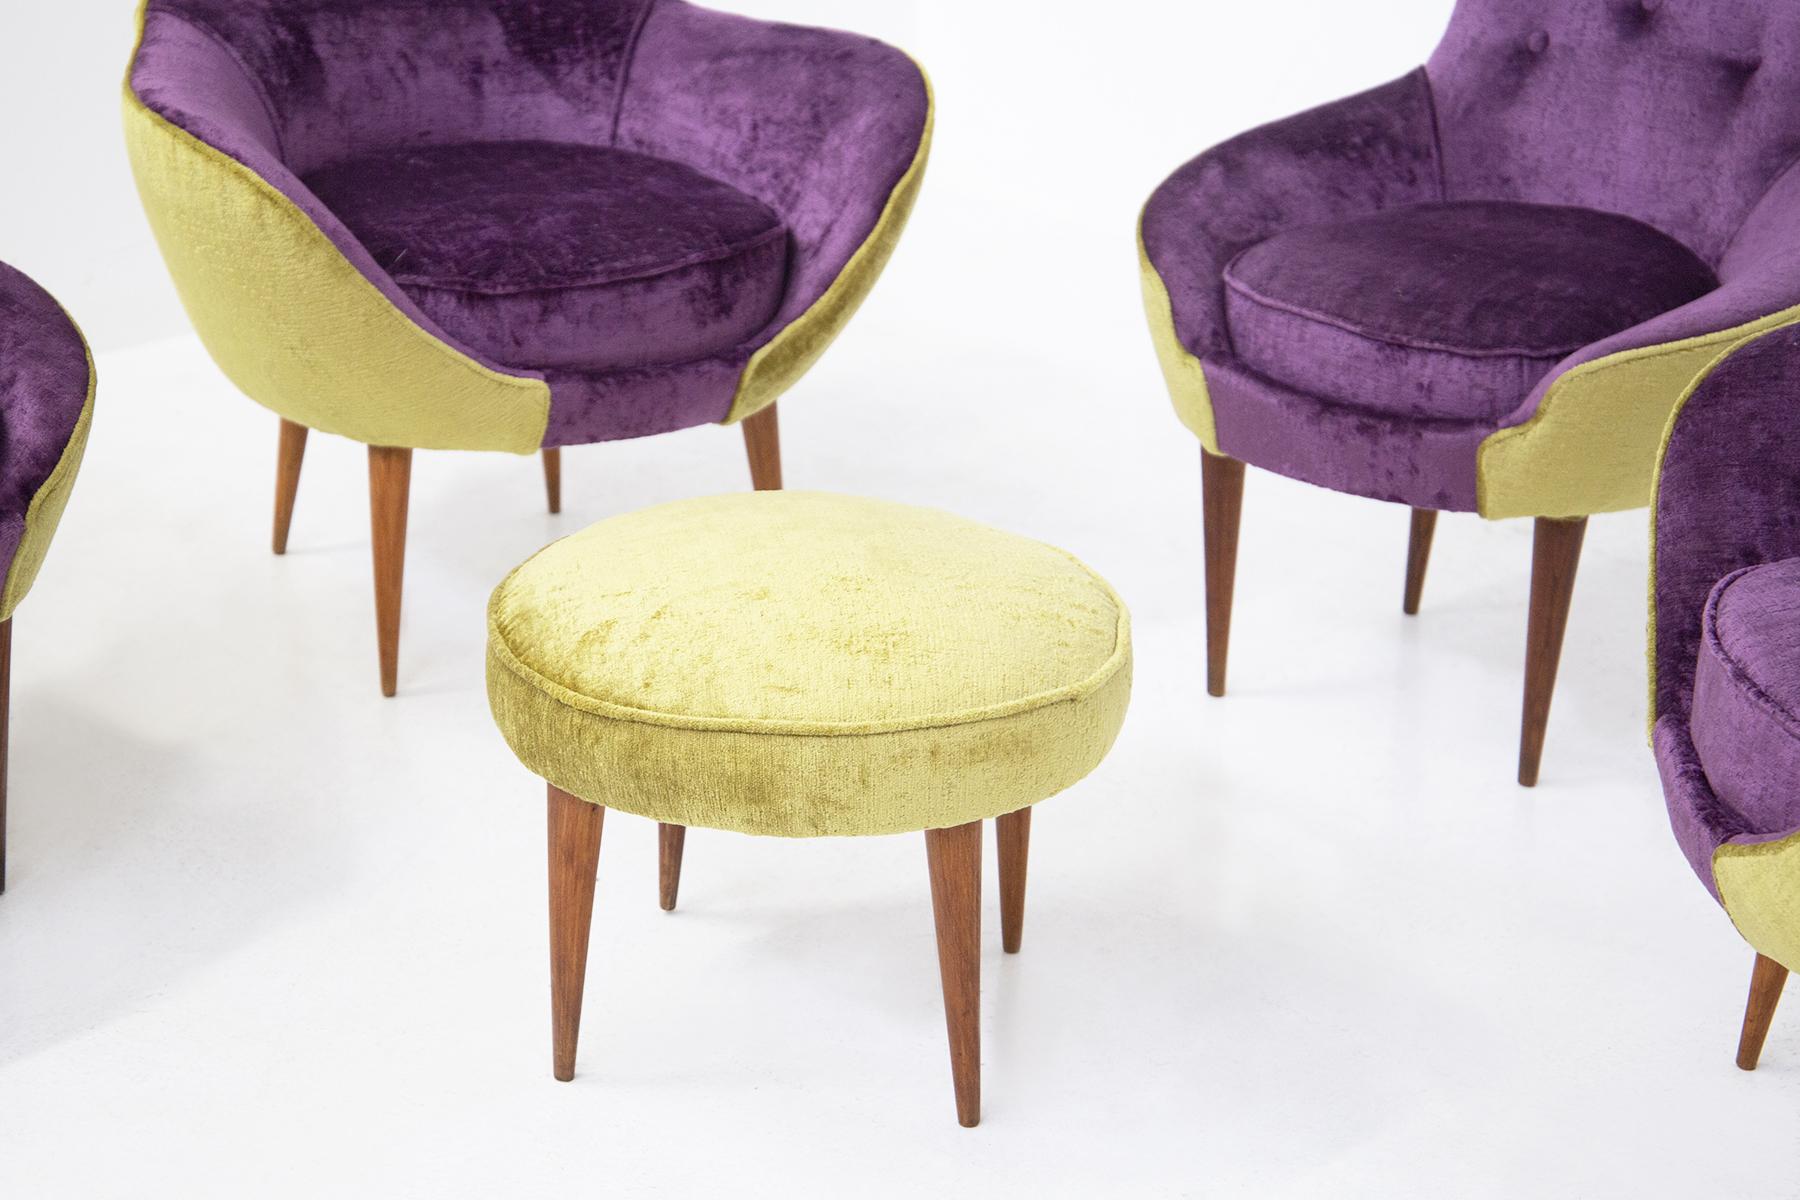 Mid-20th Century Small Vintage Wooden Armchairs in Velvet Purple and Green with Pouf For Sale